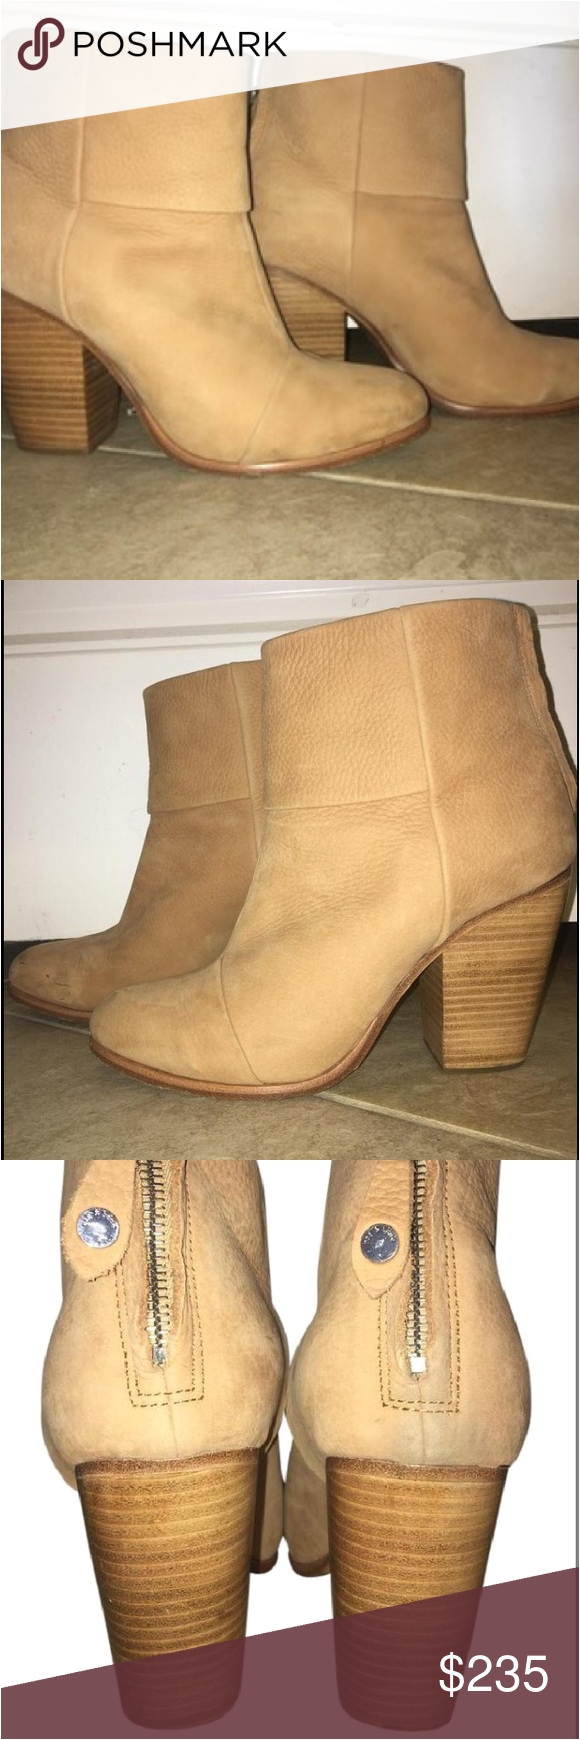 rag and bone classic newbury light tan booties signature rag a bone newbury booties size 39 5 in a beautiful light tan color that is perfect year round